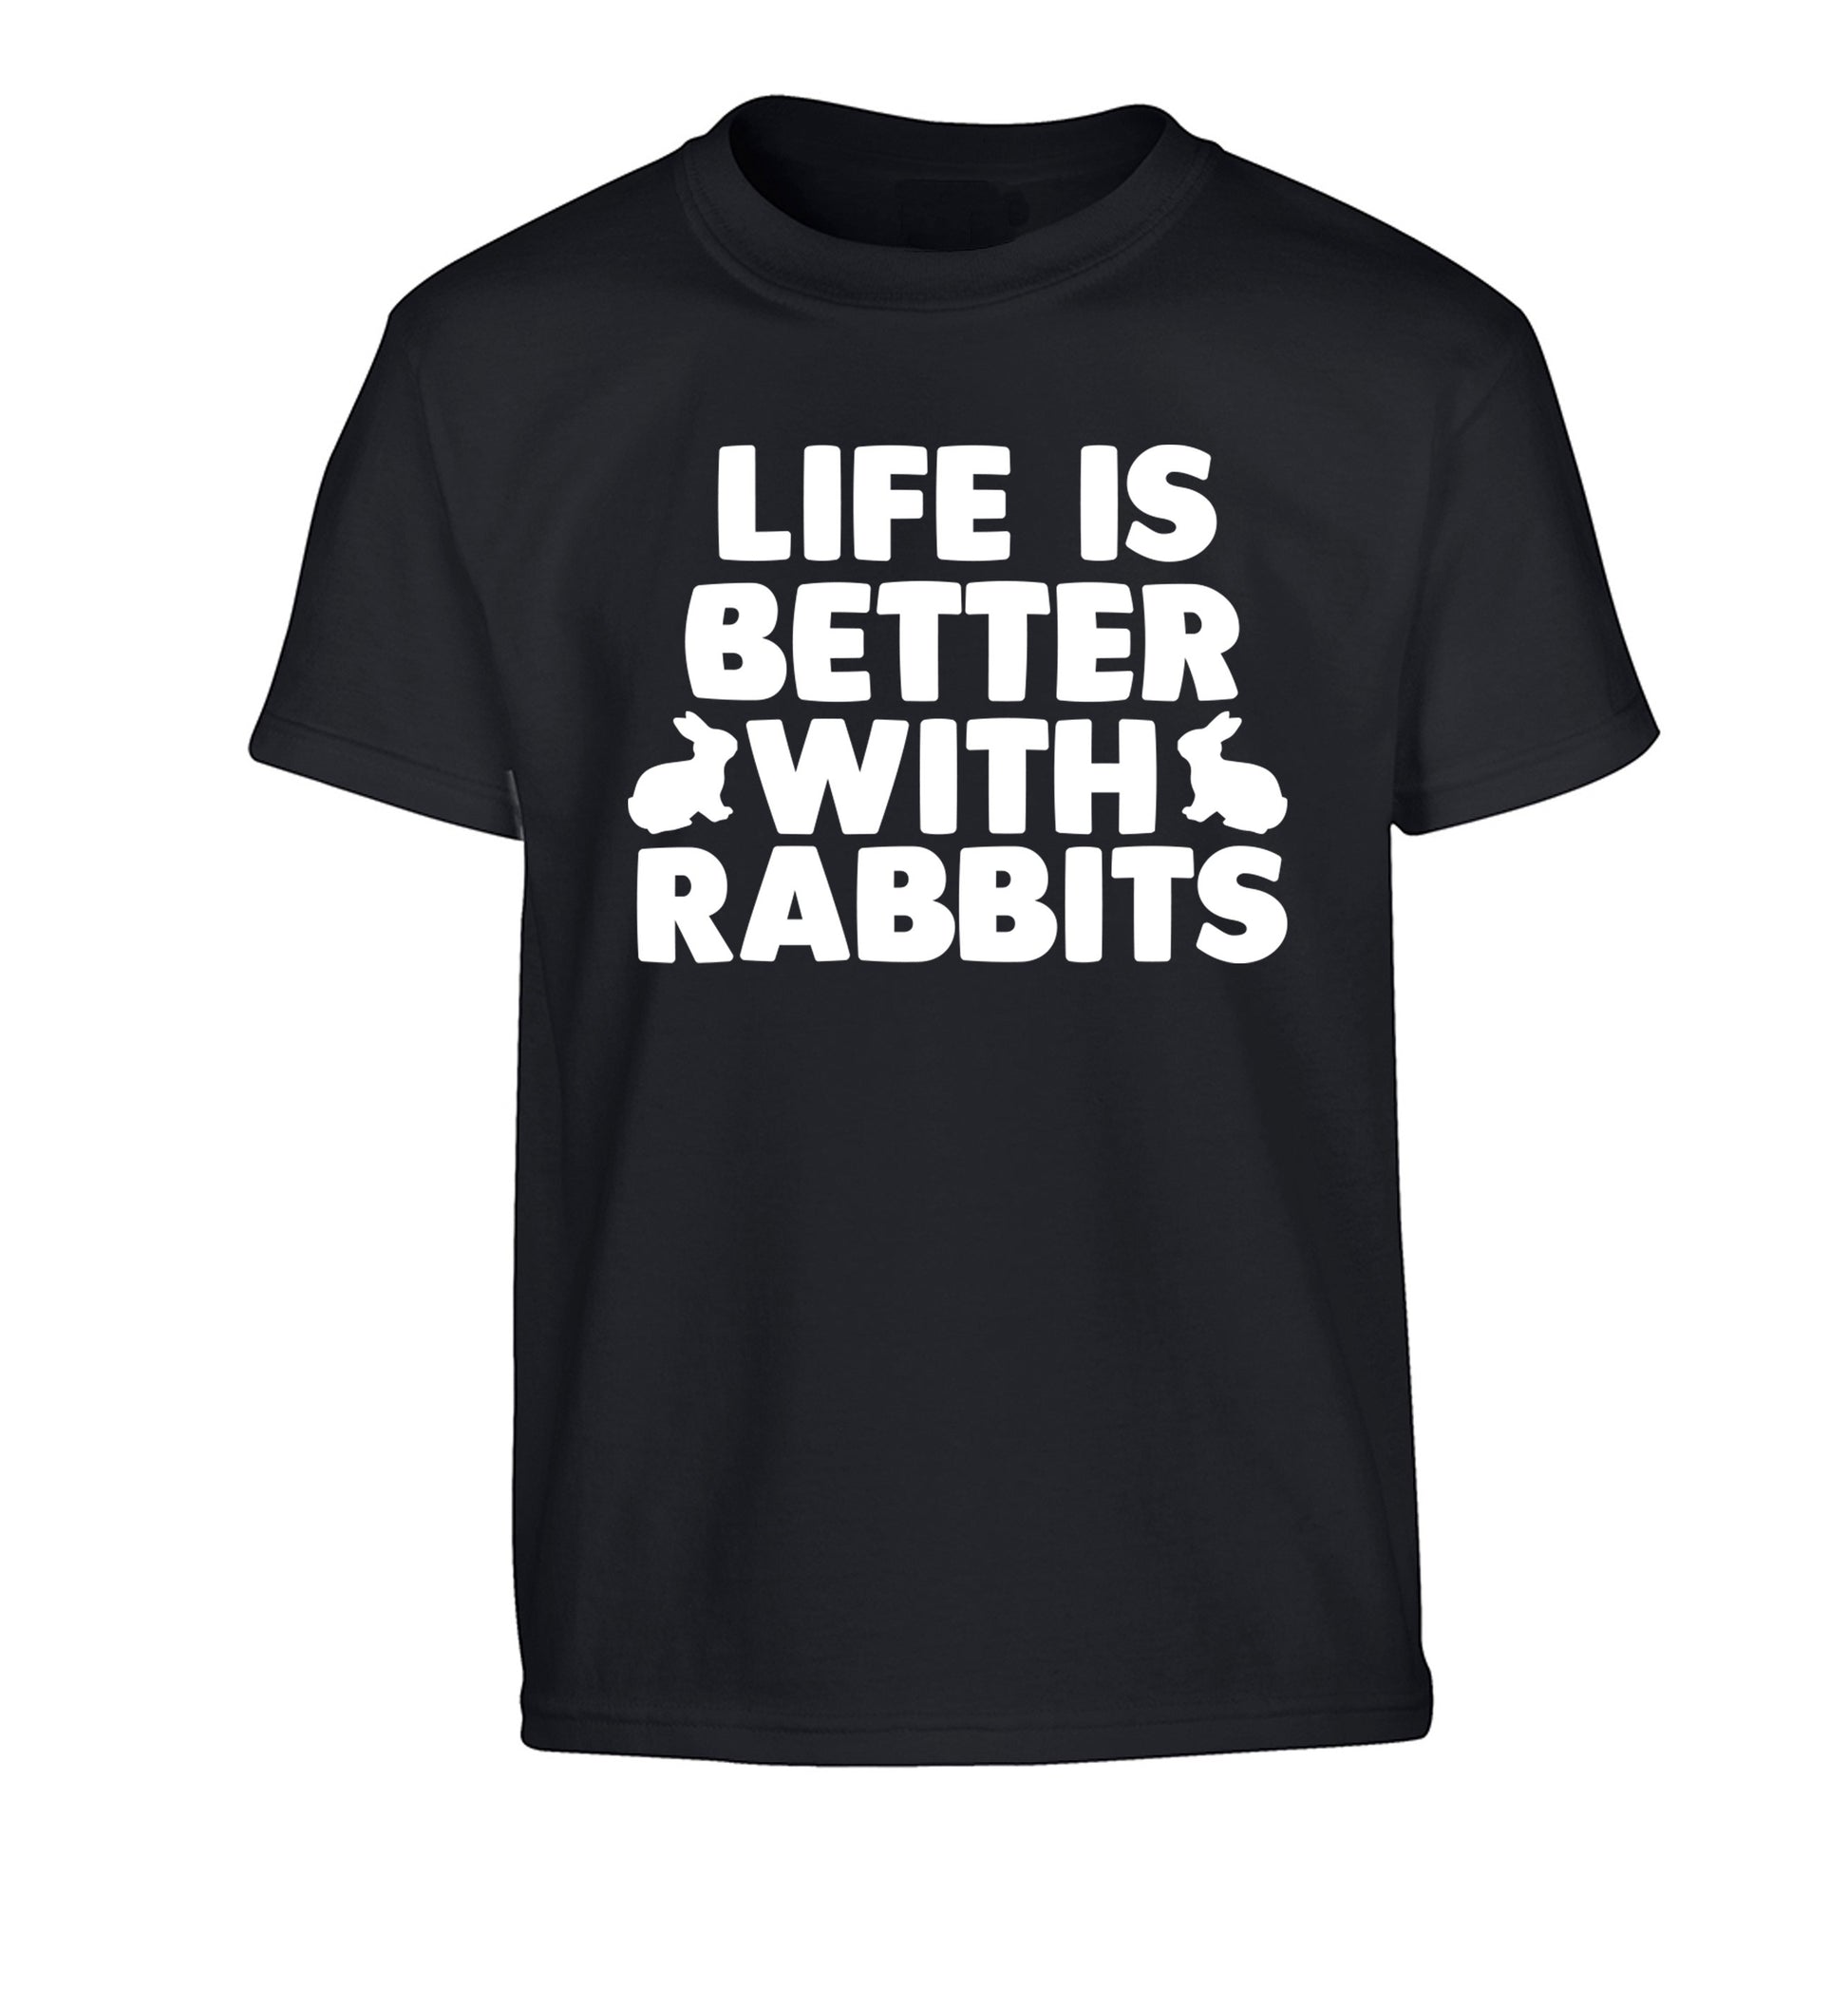 Life is better with rabbits Children's black Tshirt 12-14 Years